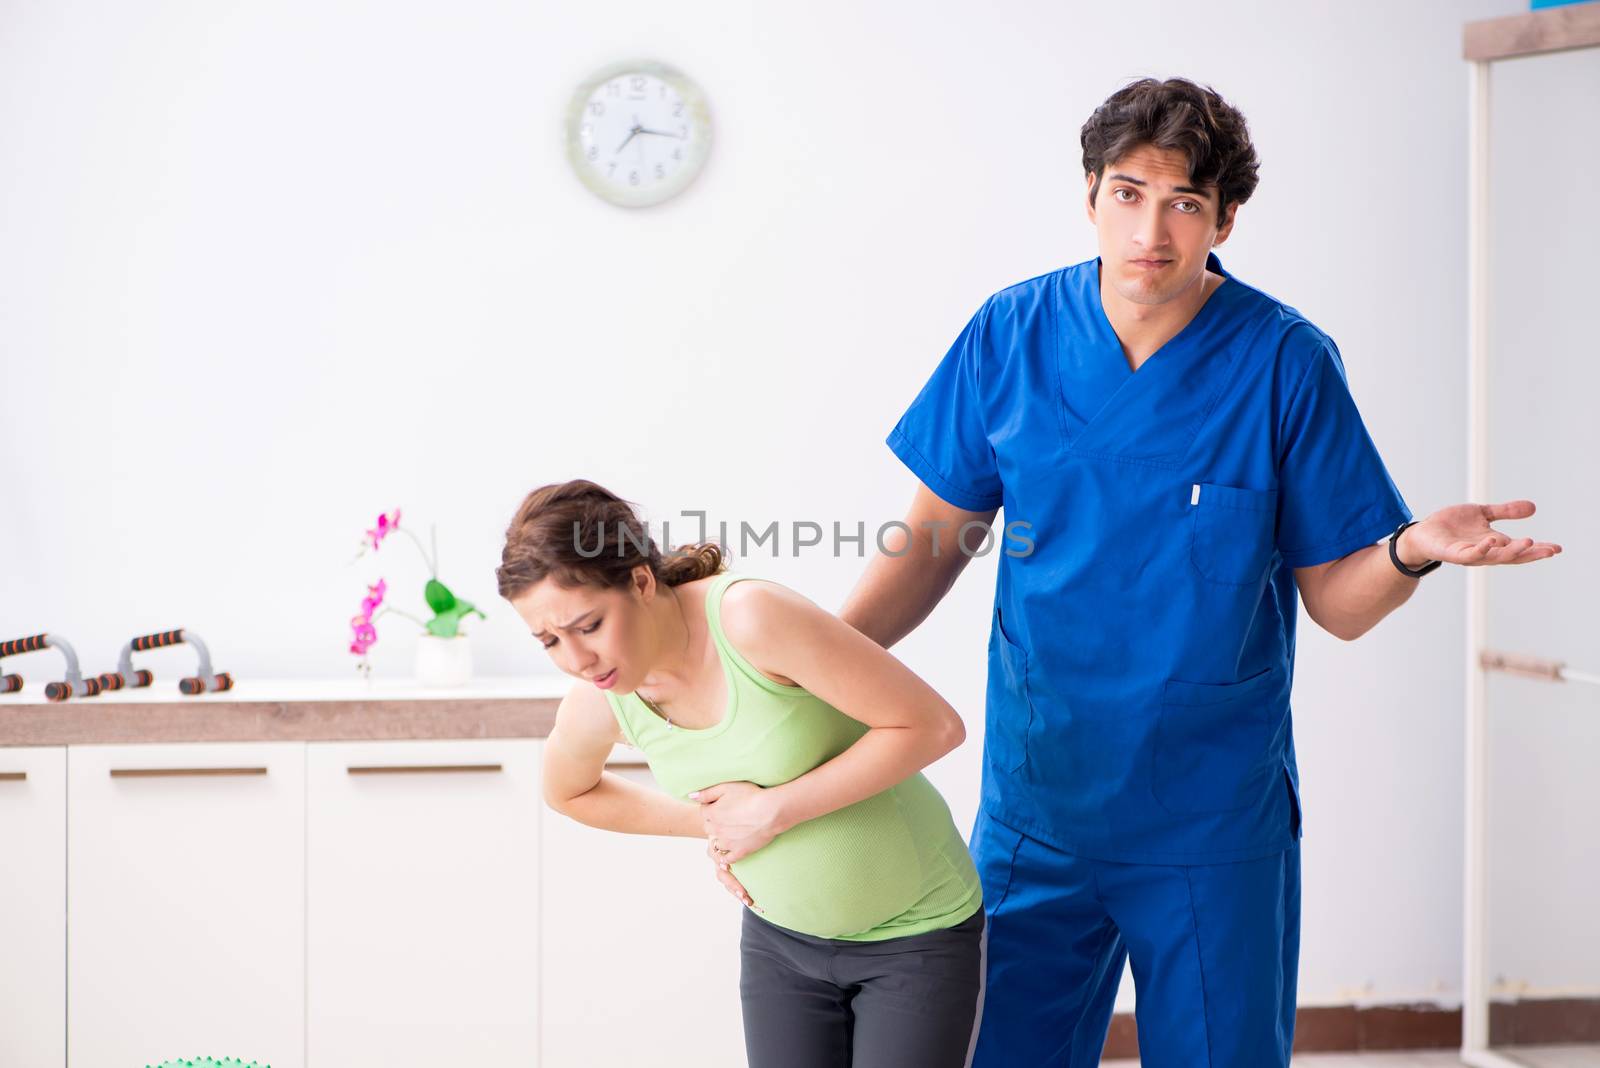 Pregnant woman doing physical exercies with instructor